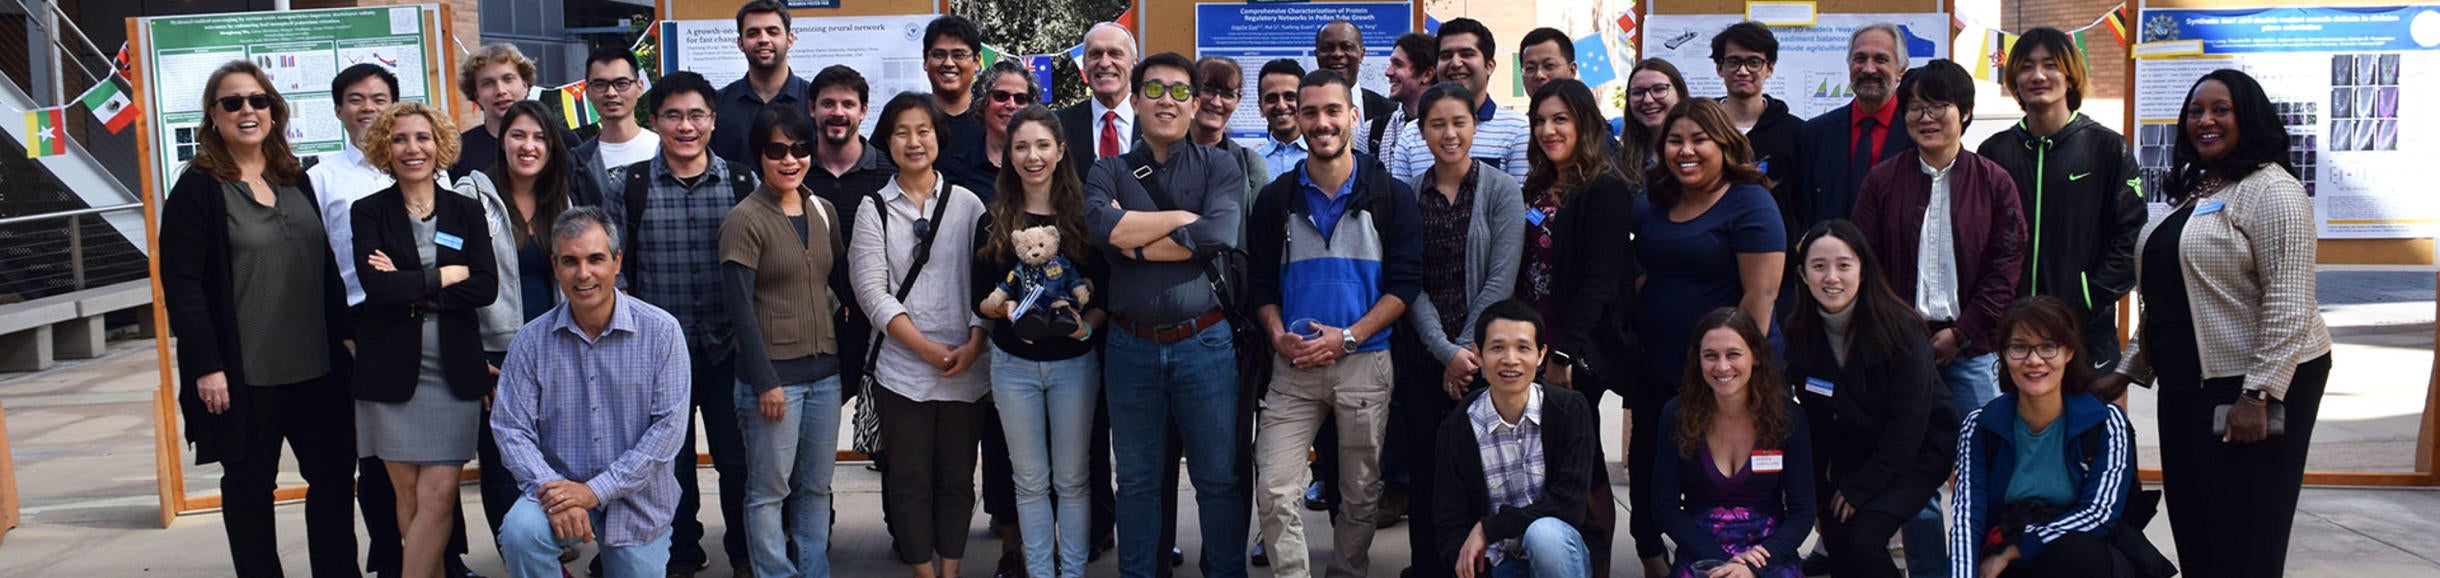 Large group of international scholars at UCR research poster fair